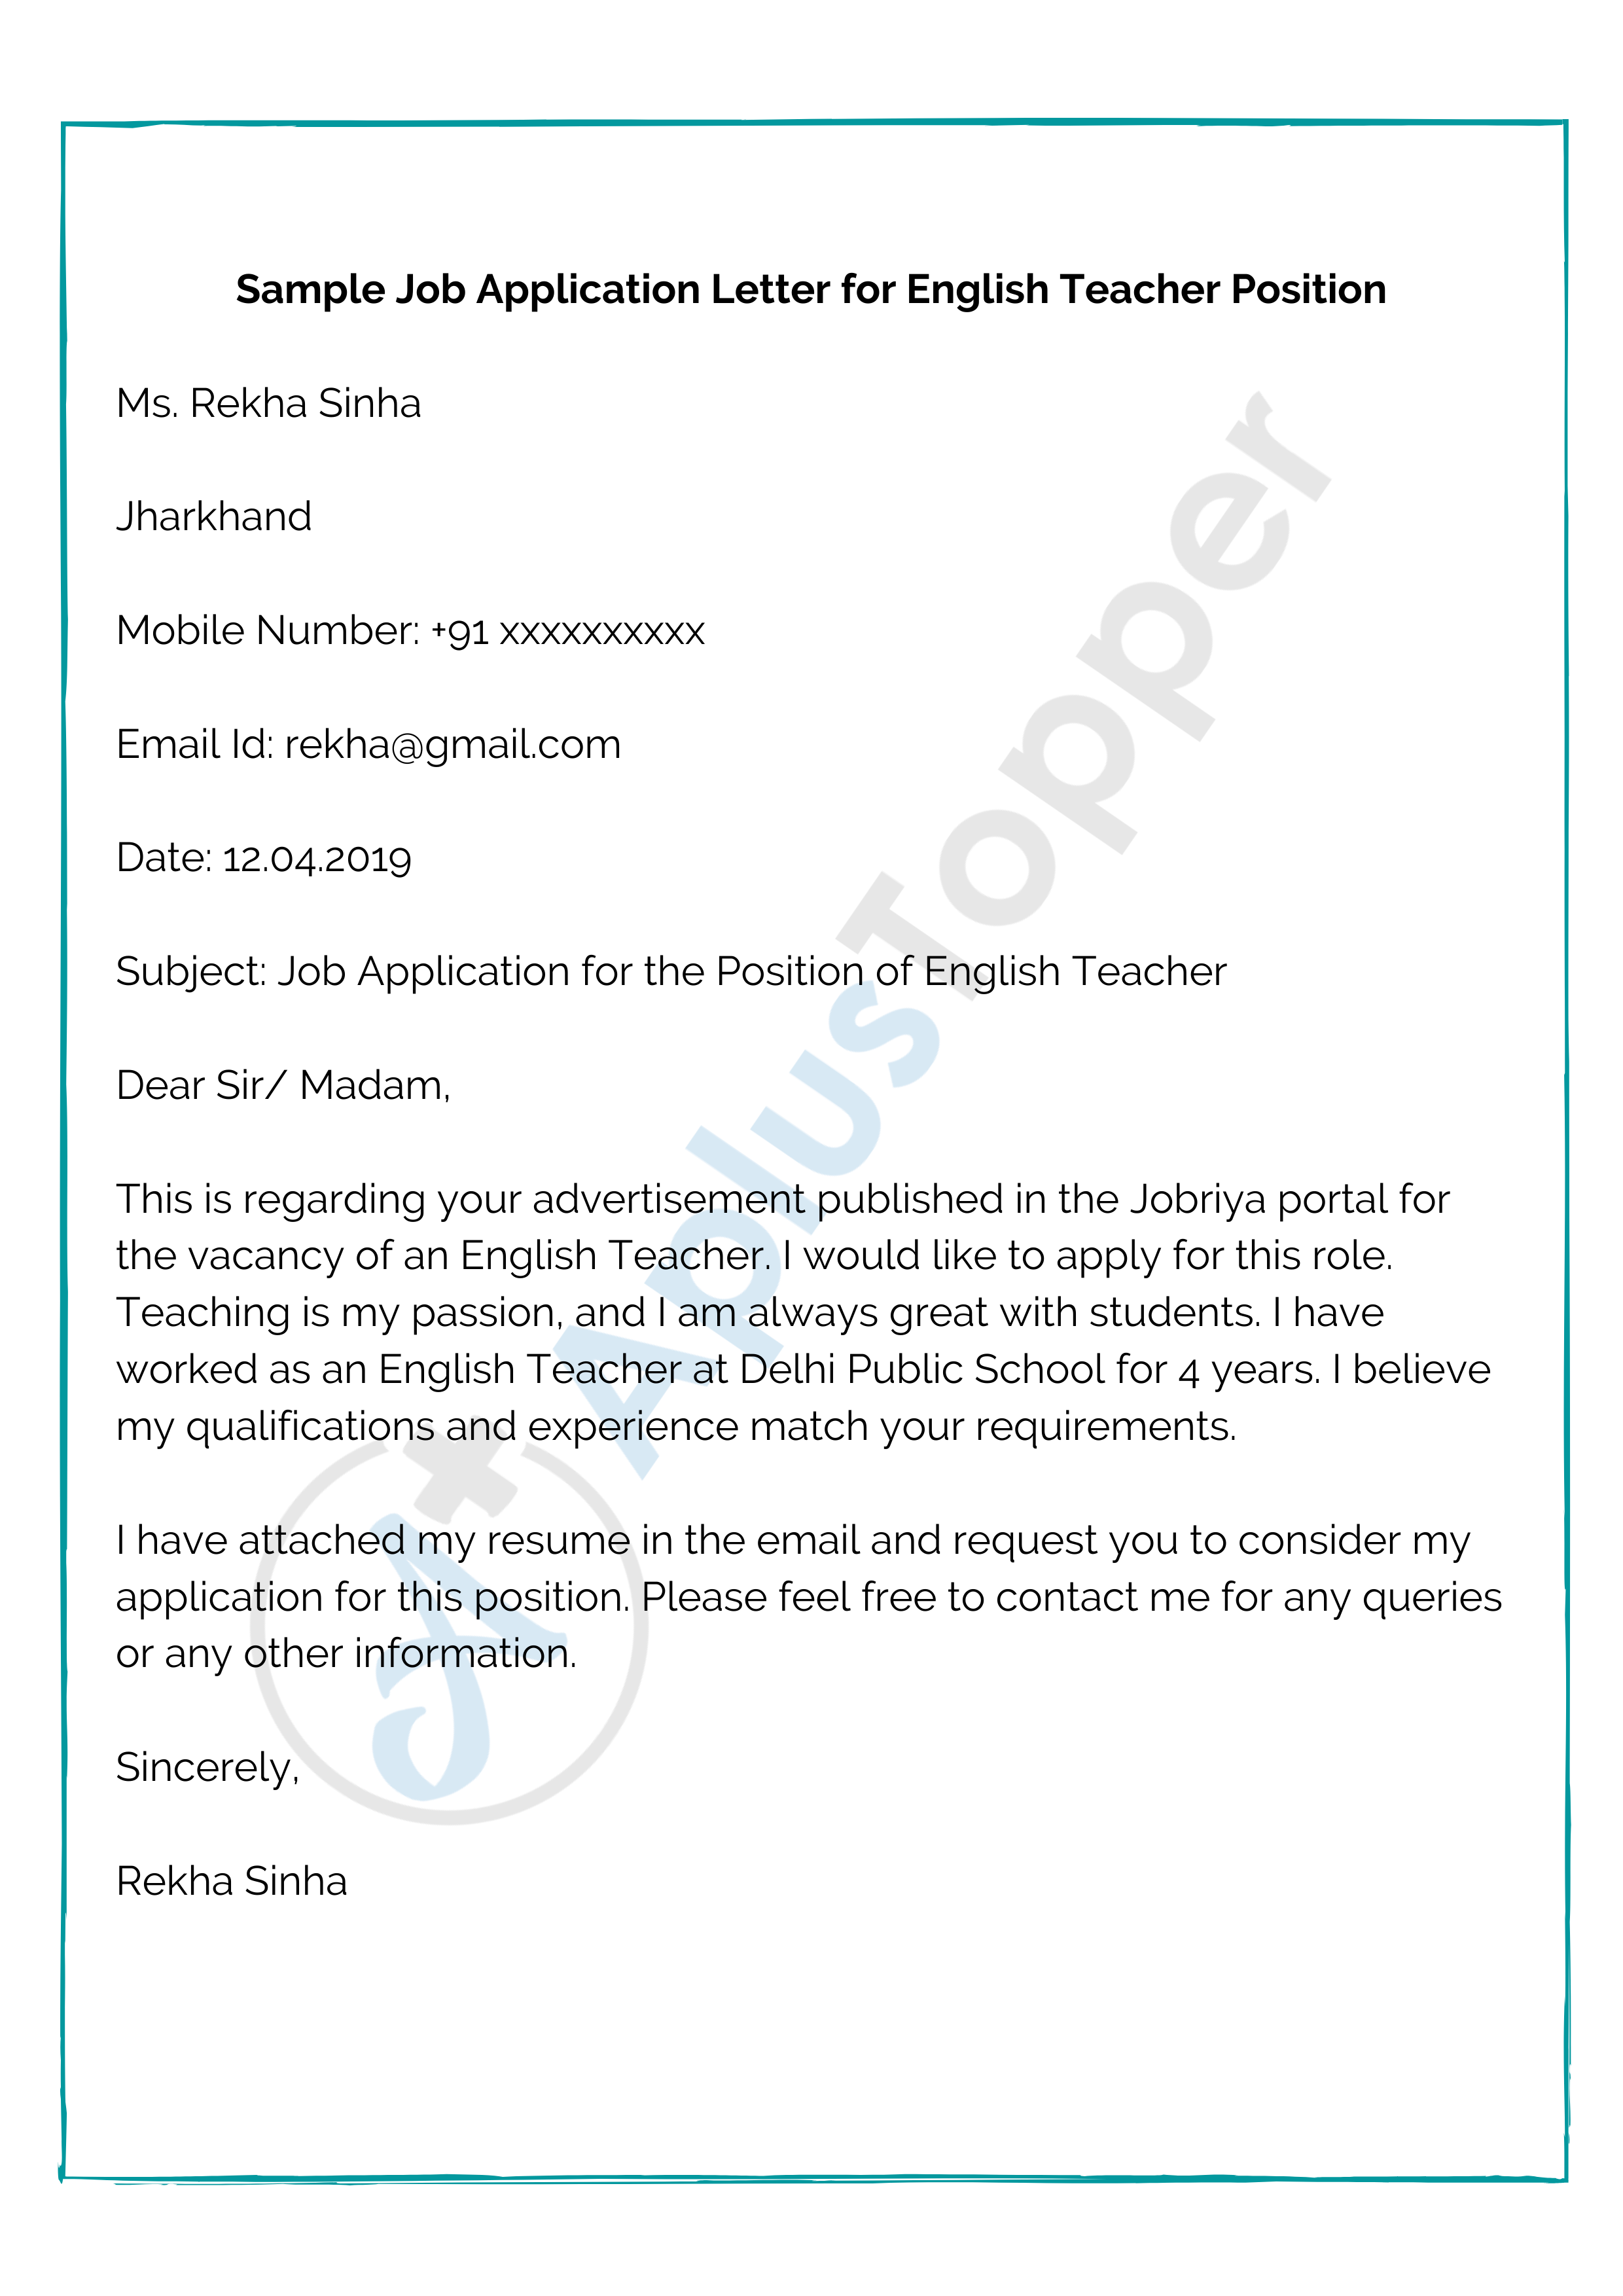 how to write an application letter in english language